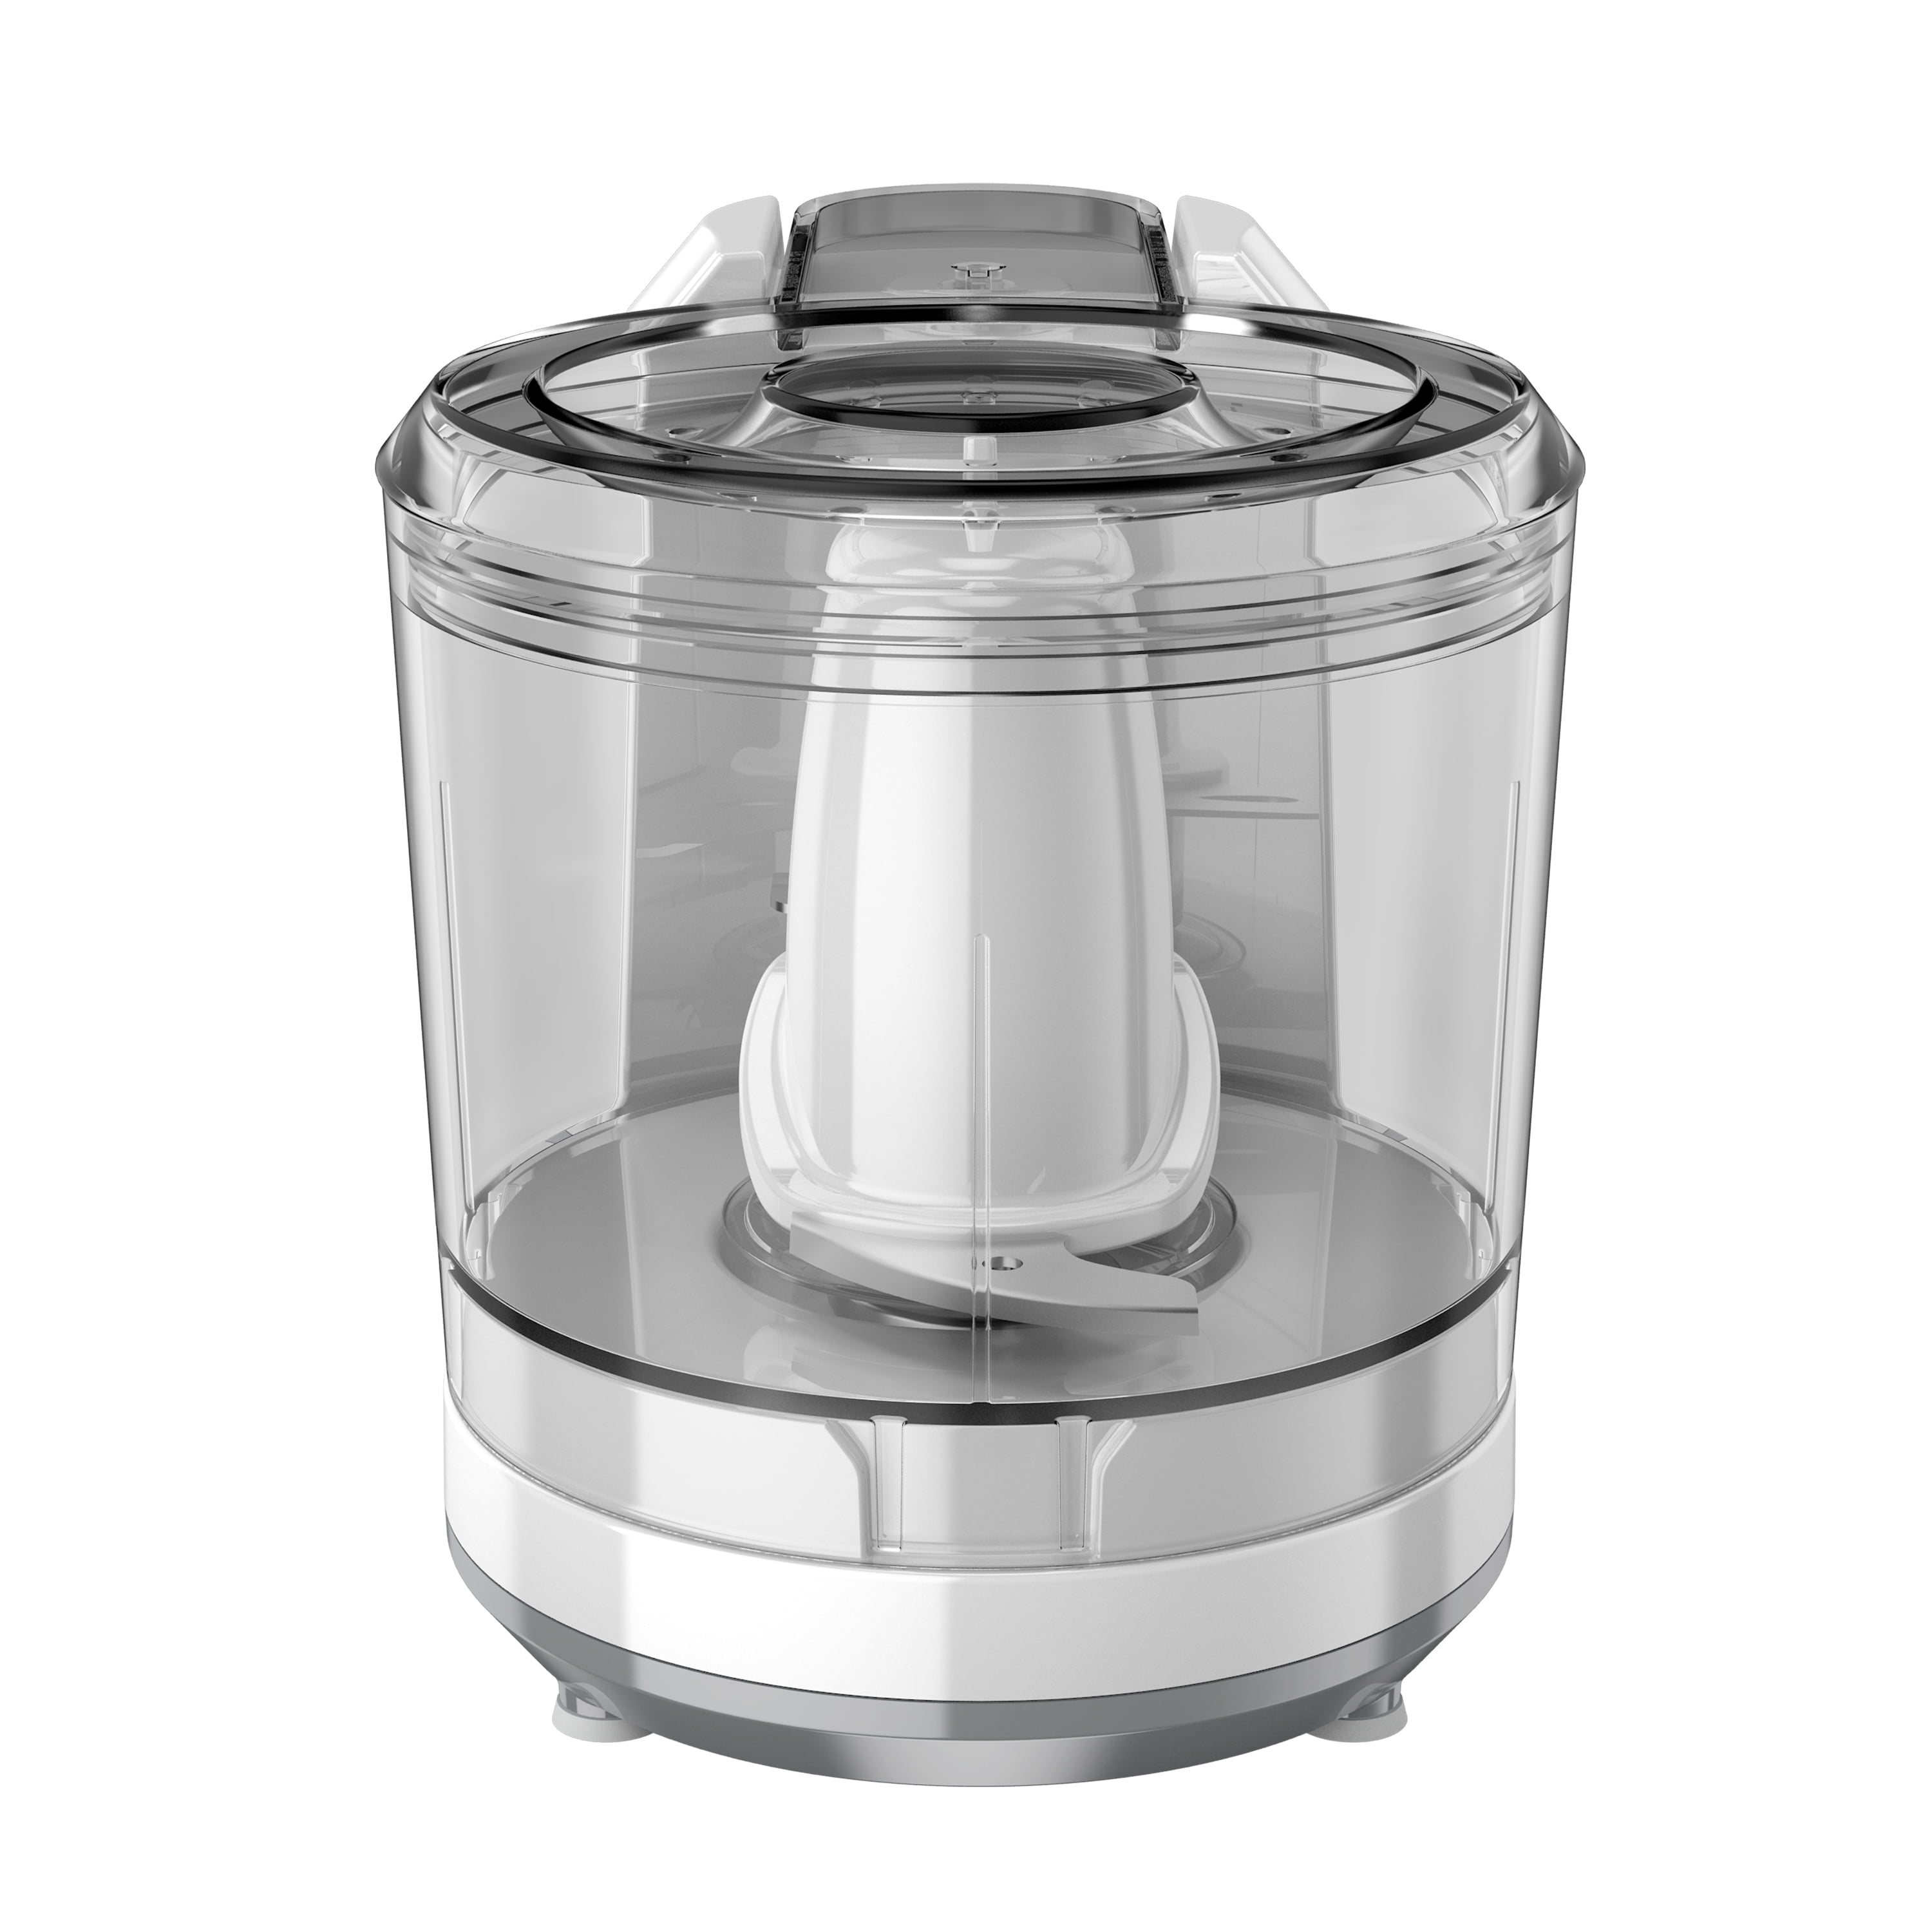  Black+Decker HC150B 1.5-Cup One-Touch Electric Food Chopper,  Capacity & Rice Cooker, 6-cup, White: Home & Kitchen